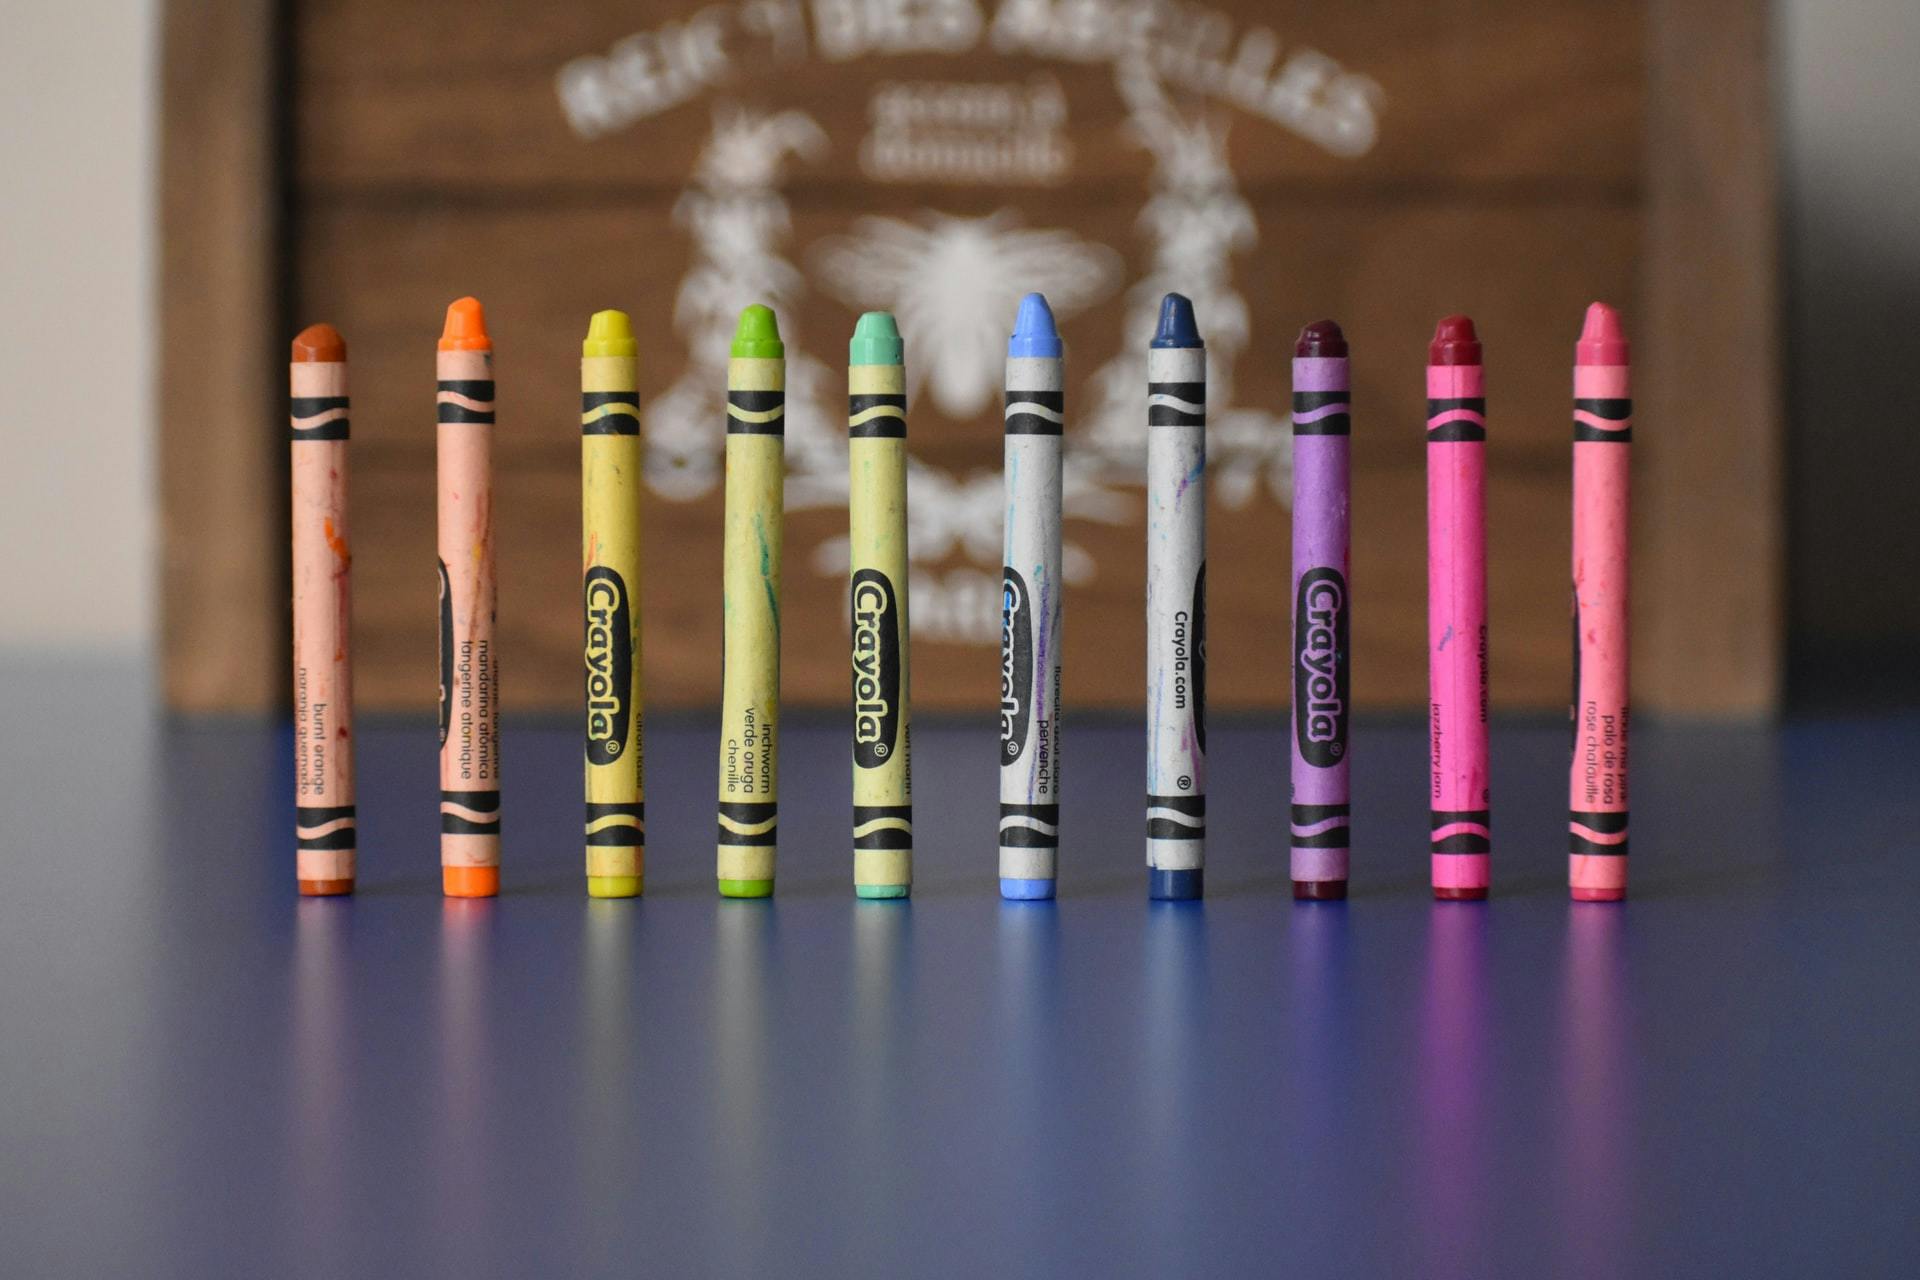 Are Crayola Markers Vegan And Non-Toxic? - The Eco Hub